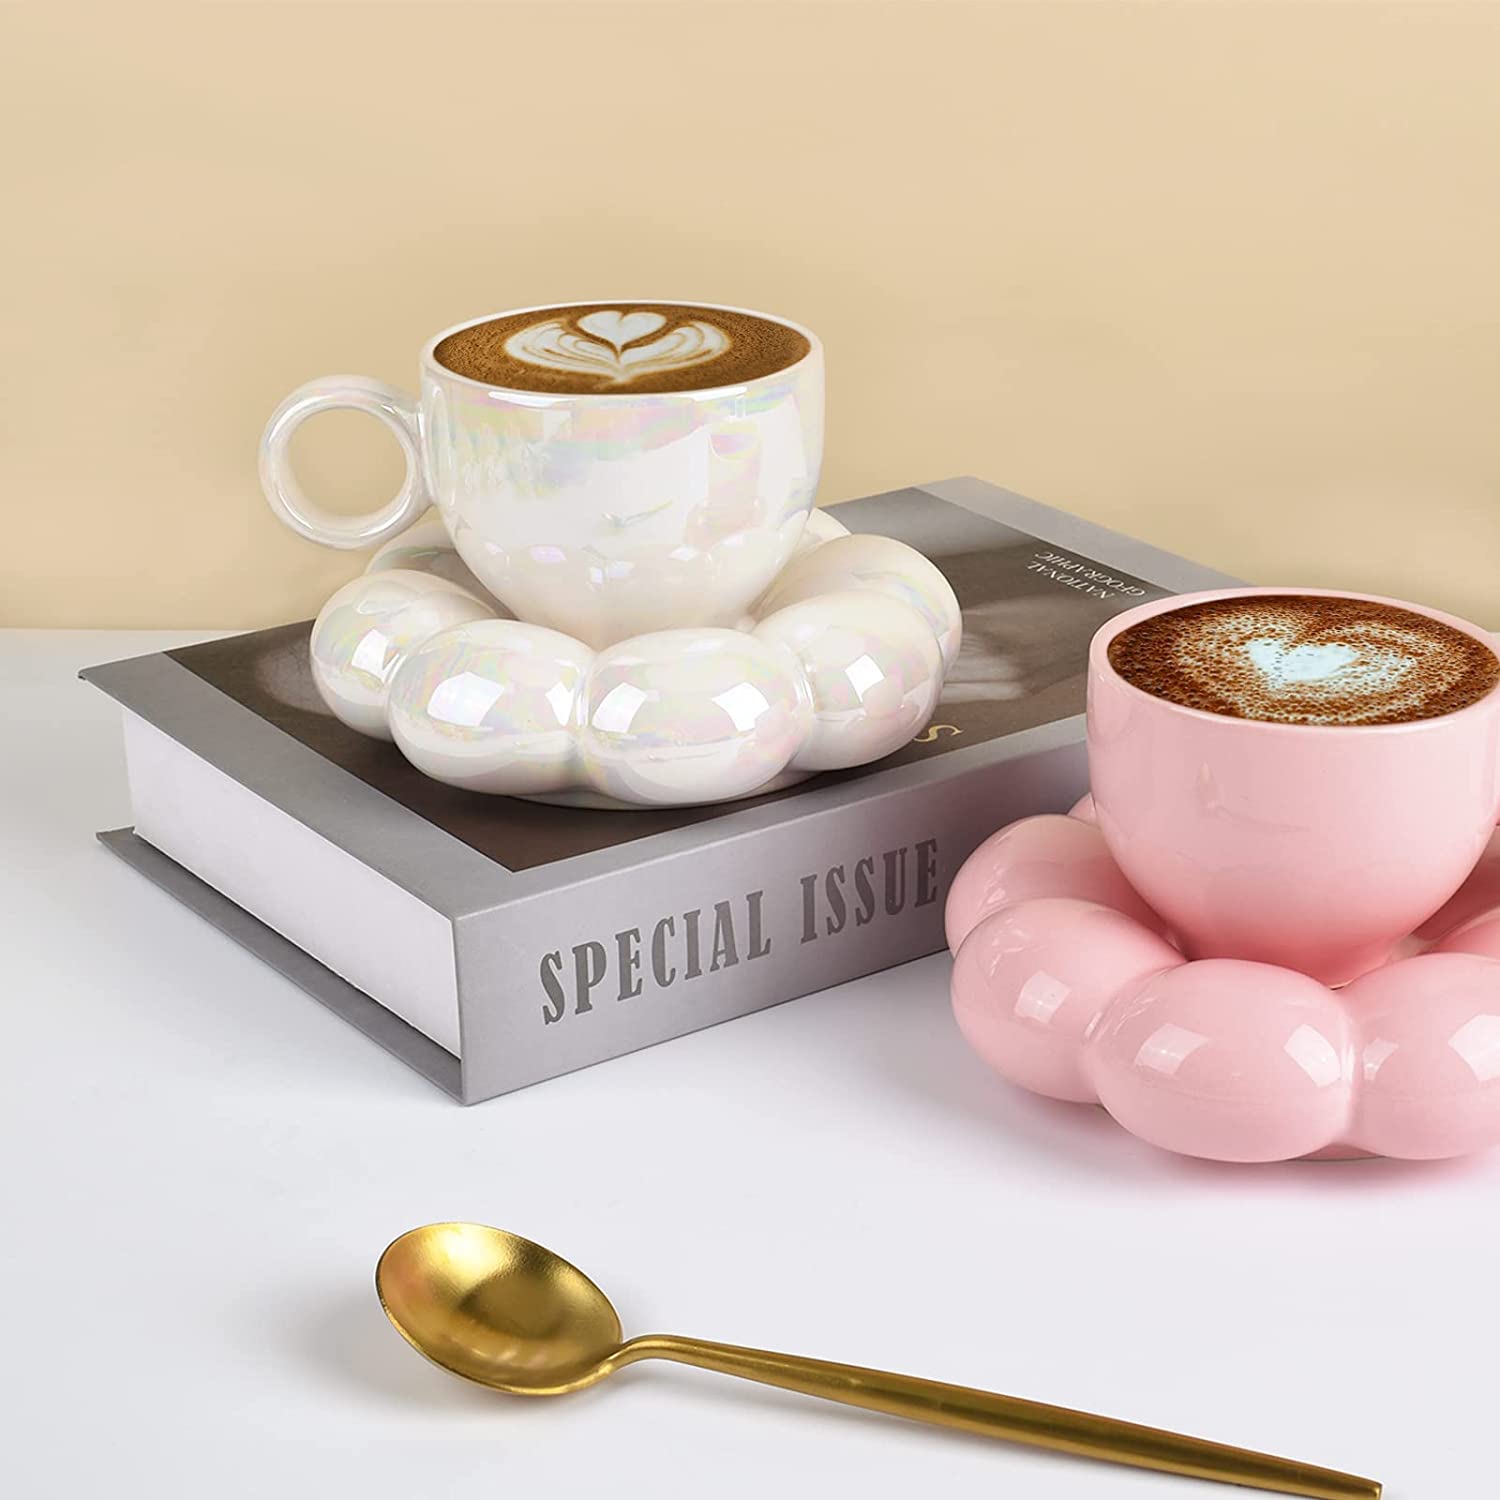 14 Best Cute Coffee Mugs to Brighten Up Your Day